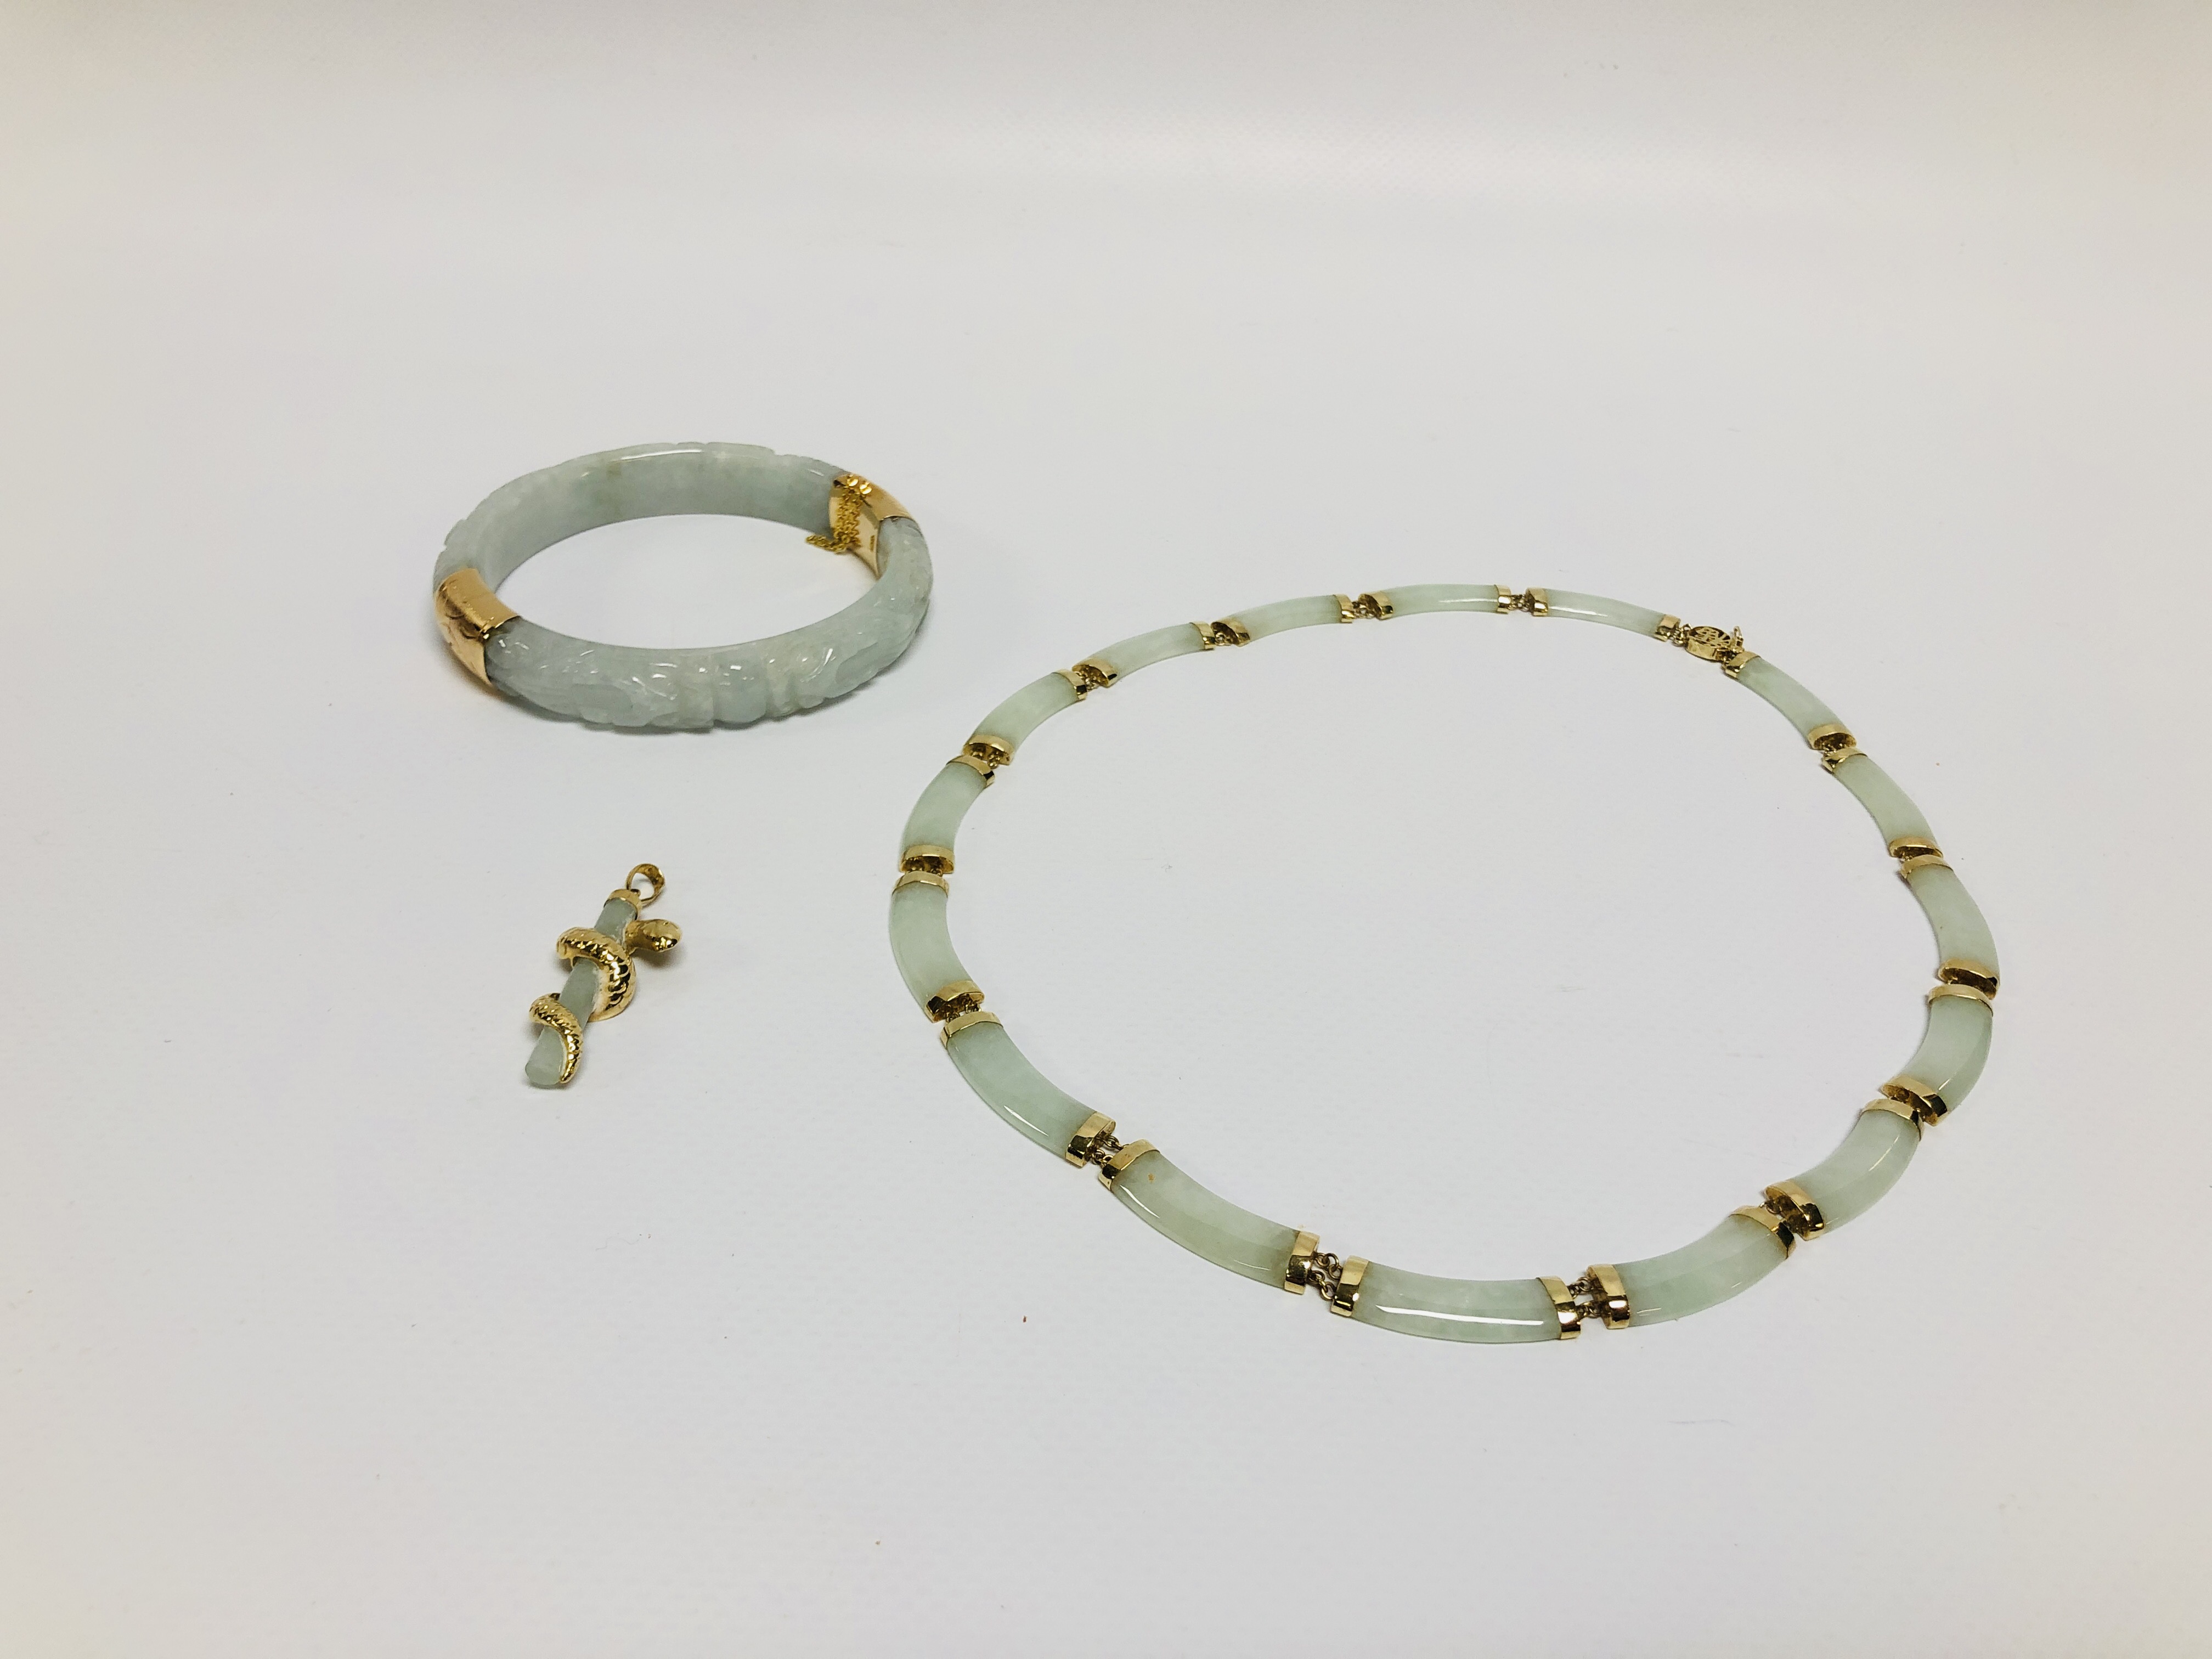 JADE NECKLACE THE LINKS AND CLASP 14CT GOLD ALONG WITH A JADE HINGED BANGLE THE CLASP AND HINGE